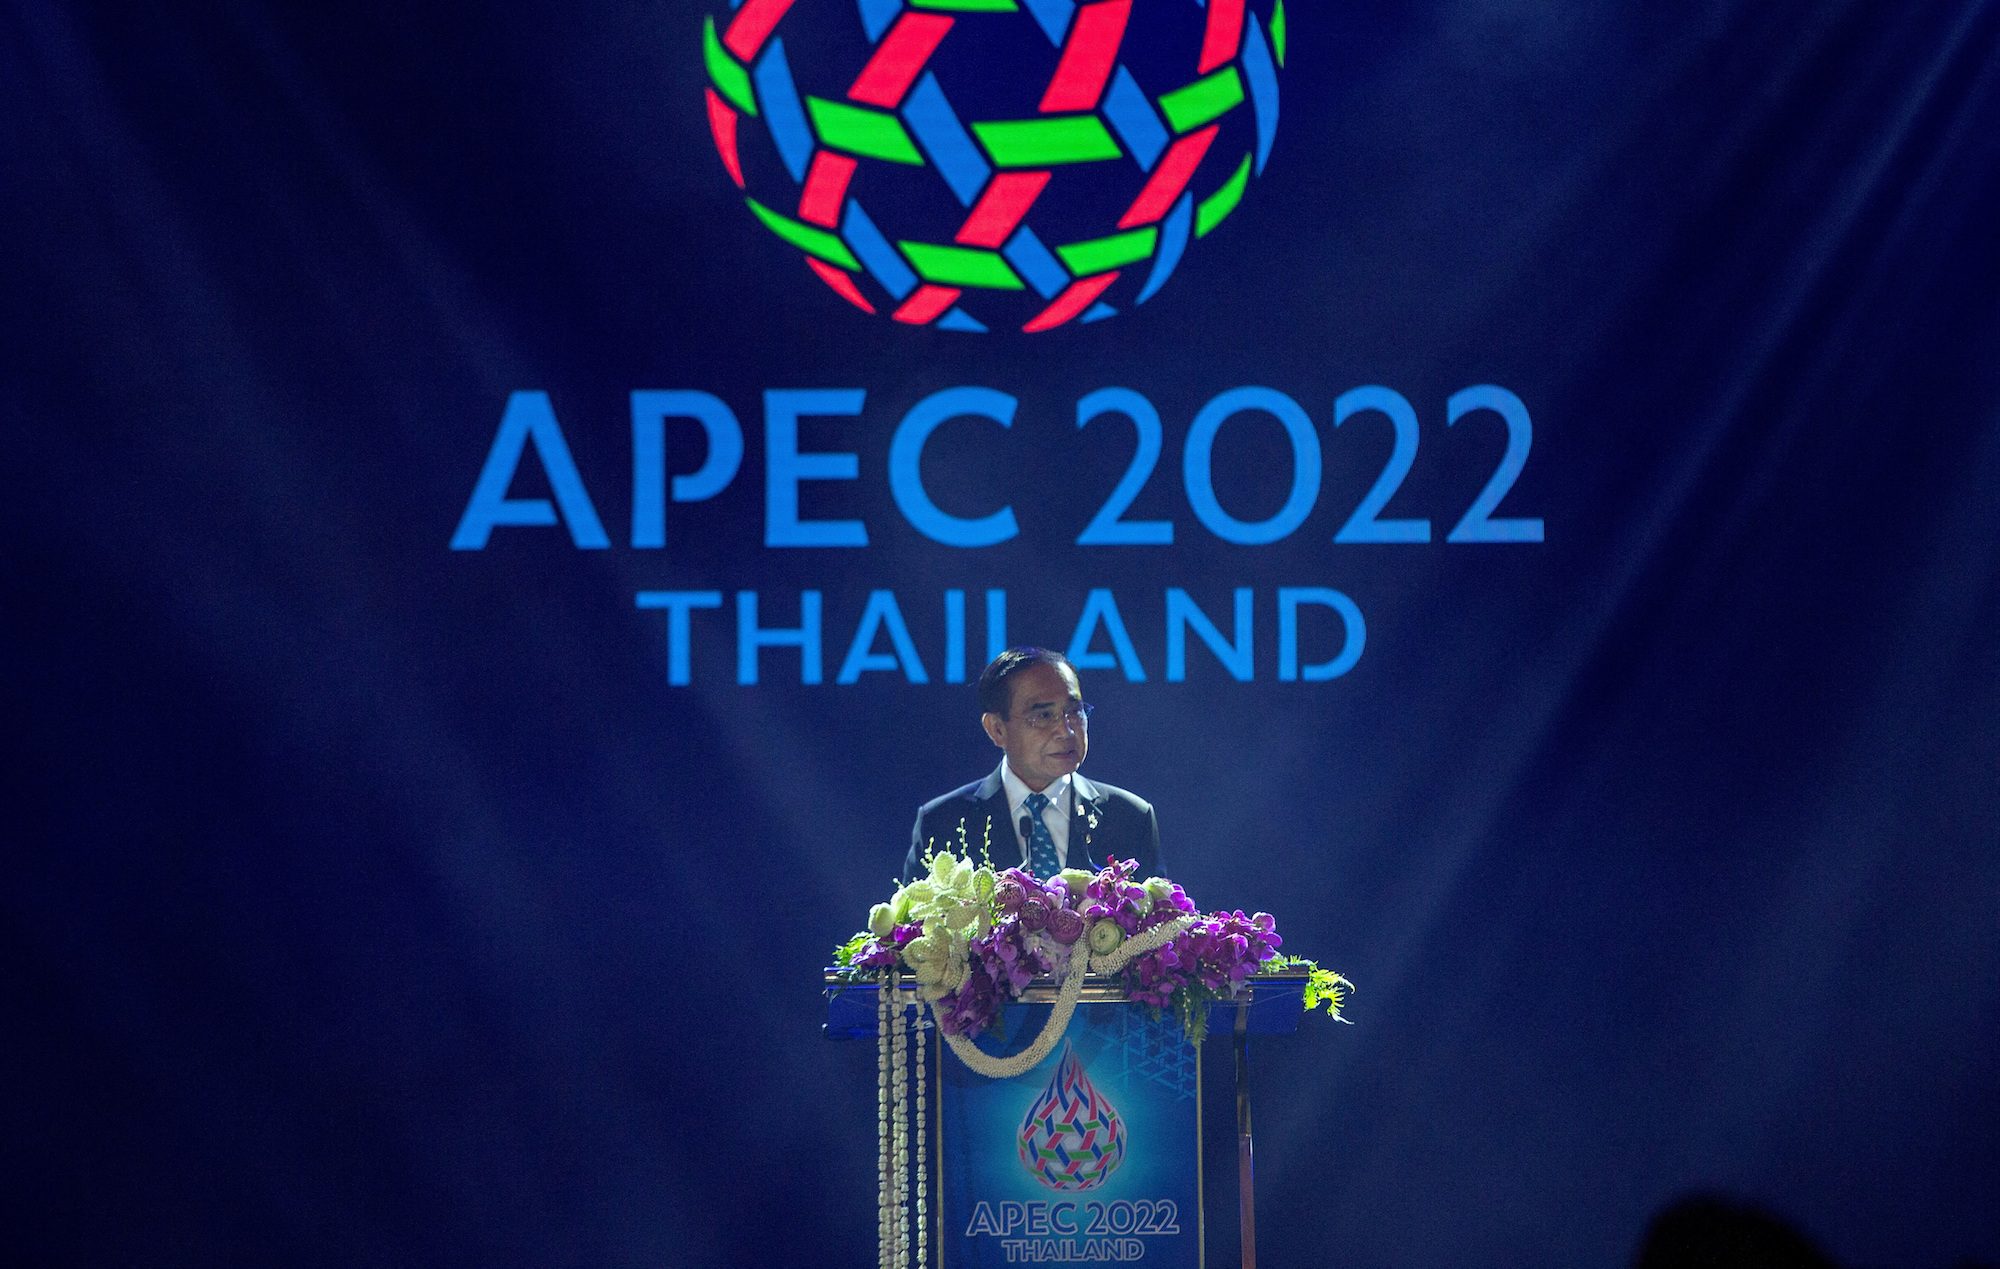 APEC summit host Thailand urges leaders to put aside differences